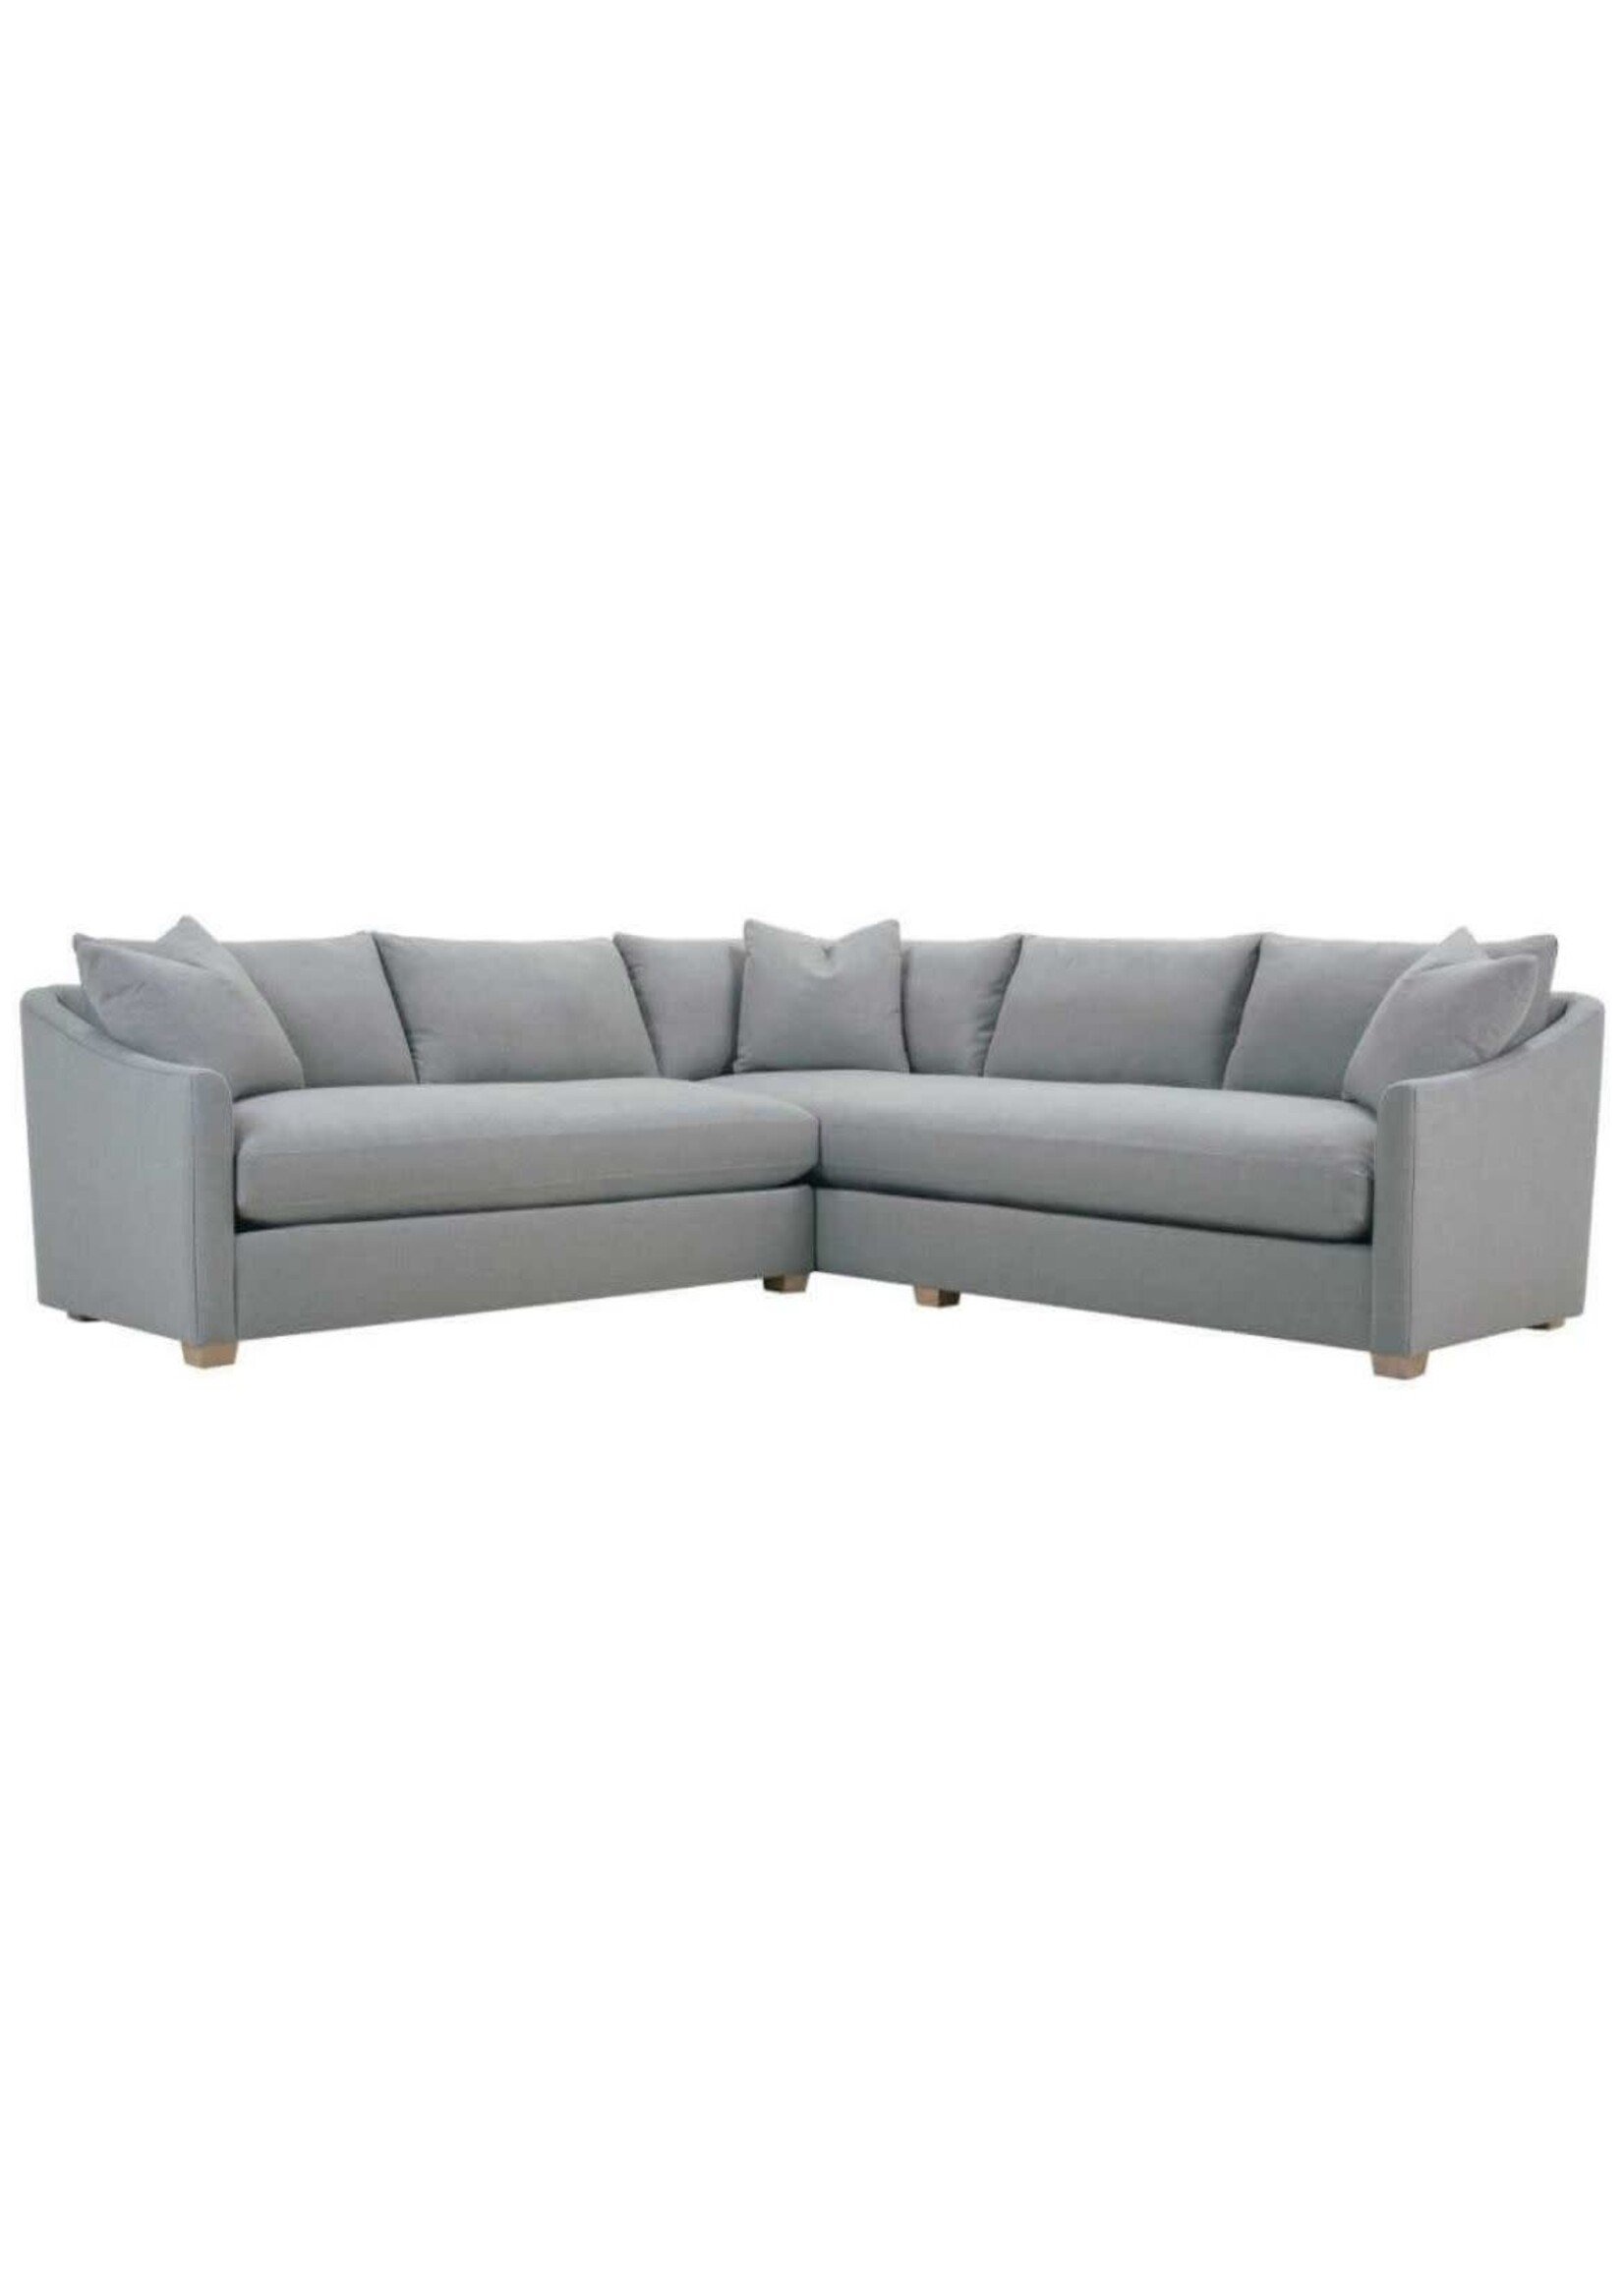 Everleigh Sectional-BR105-52(S)-WP+WO 105Lx104Lx39Dx36H